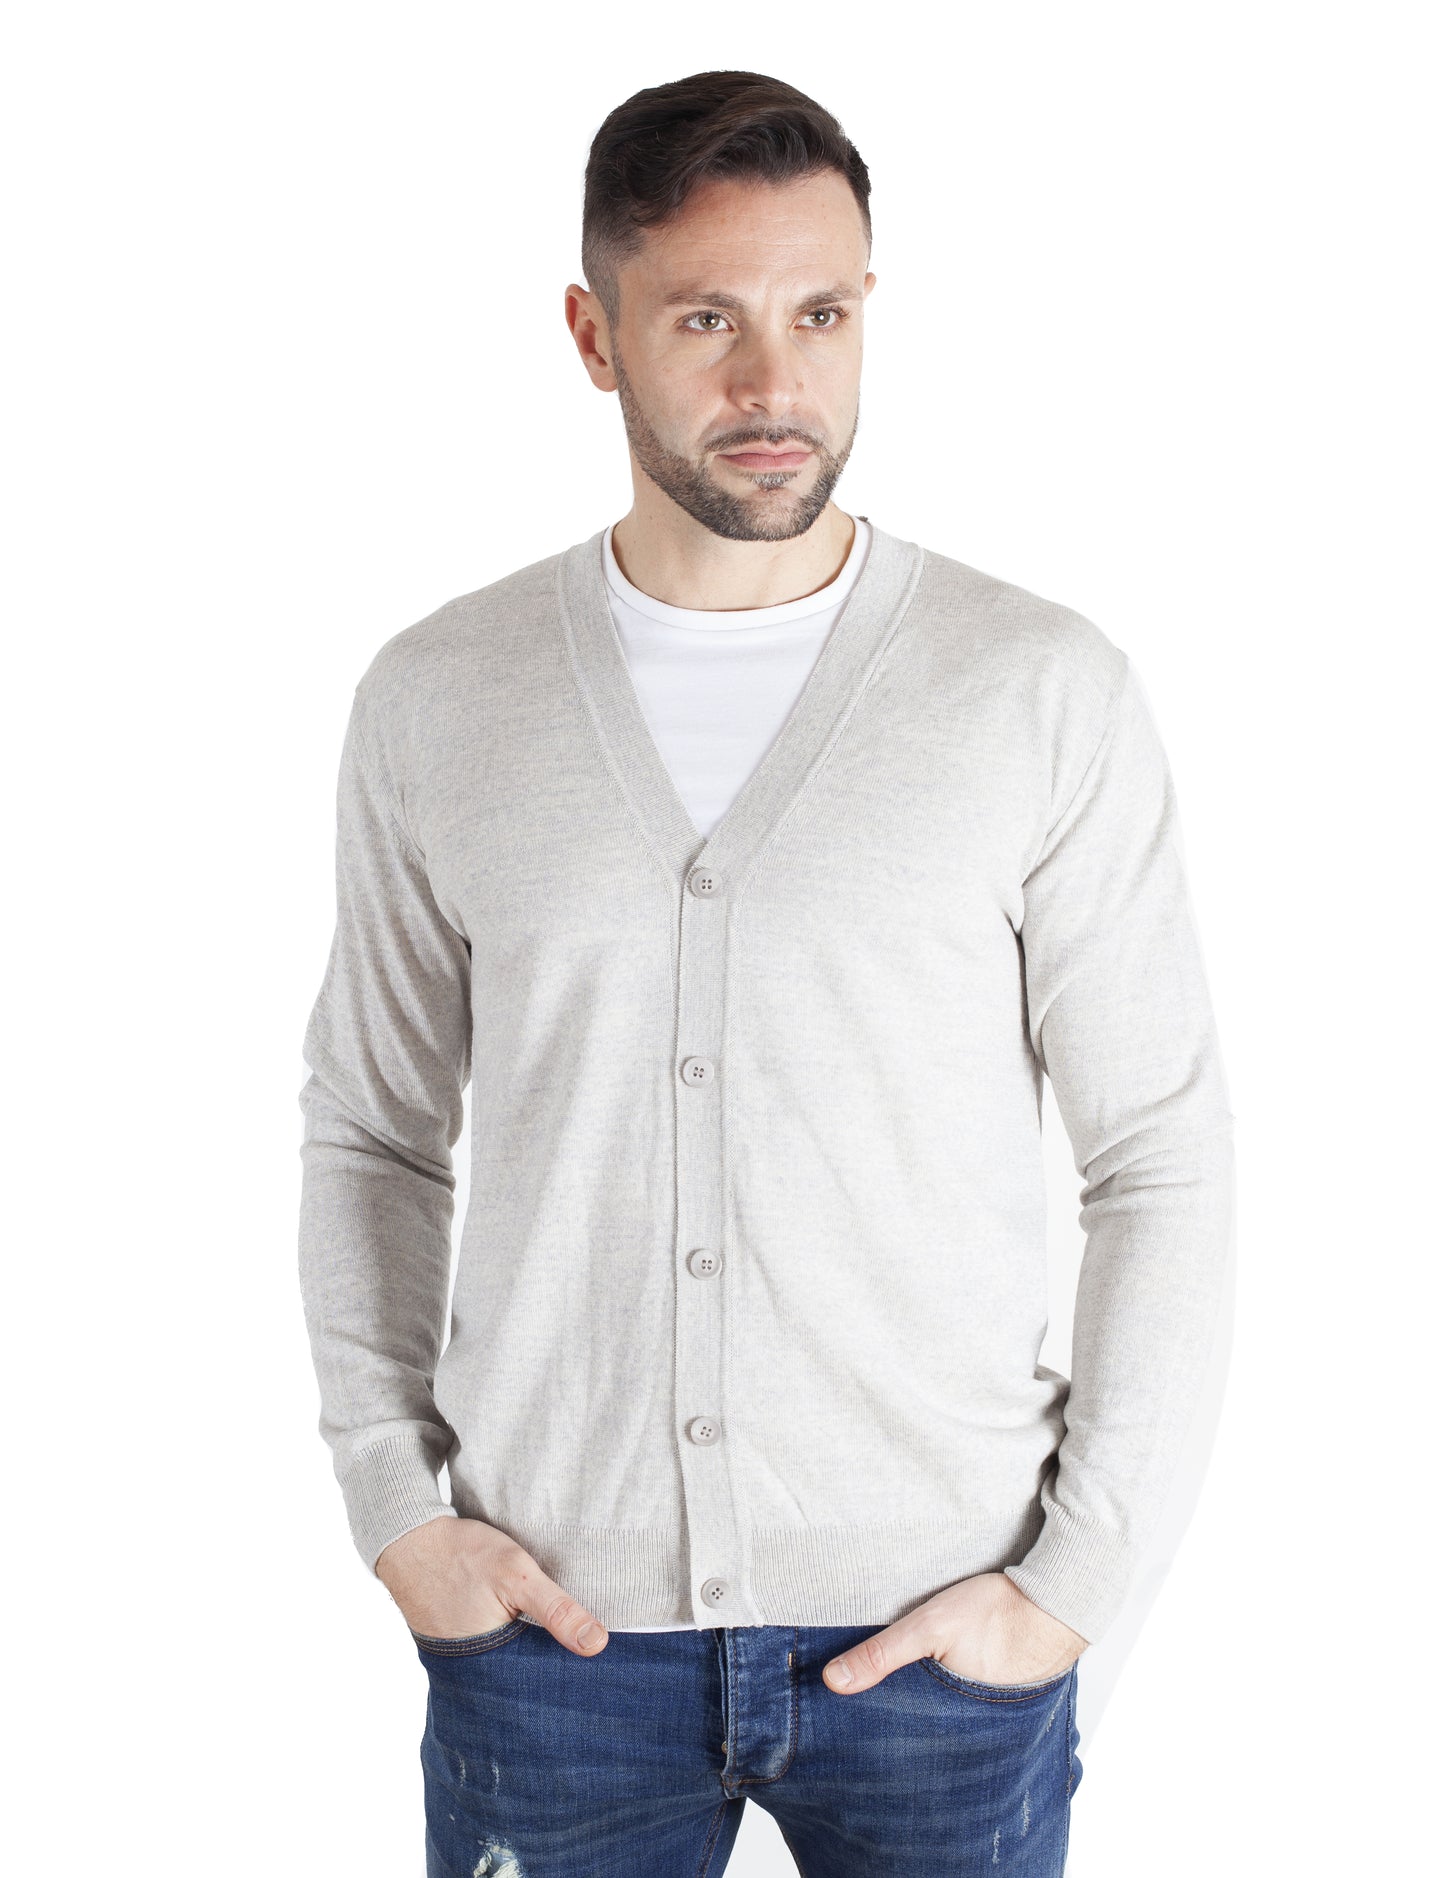 Pull Cardigan - Homme, Automne/Hiver - 100% Laine Vierge Mérinos Extrafine Sans Mulessing - 100% Made in Italy | Brunella Gori